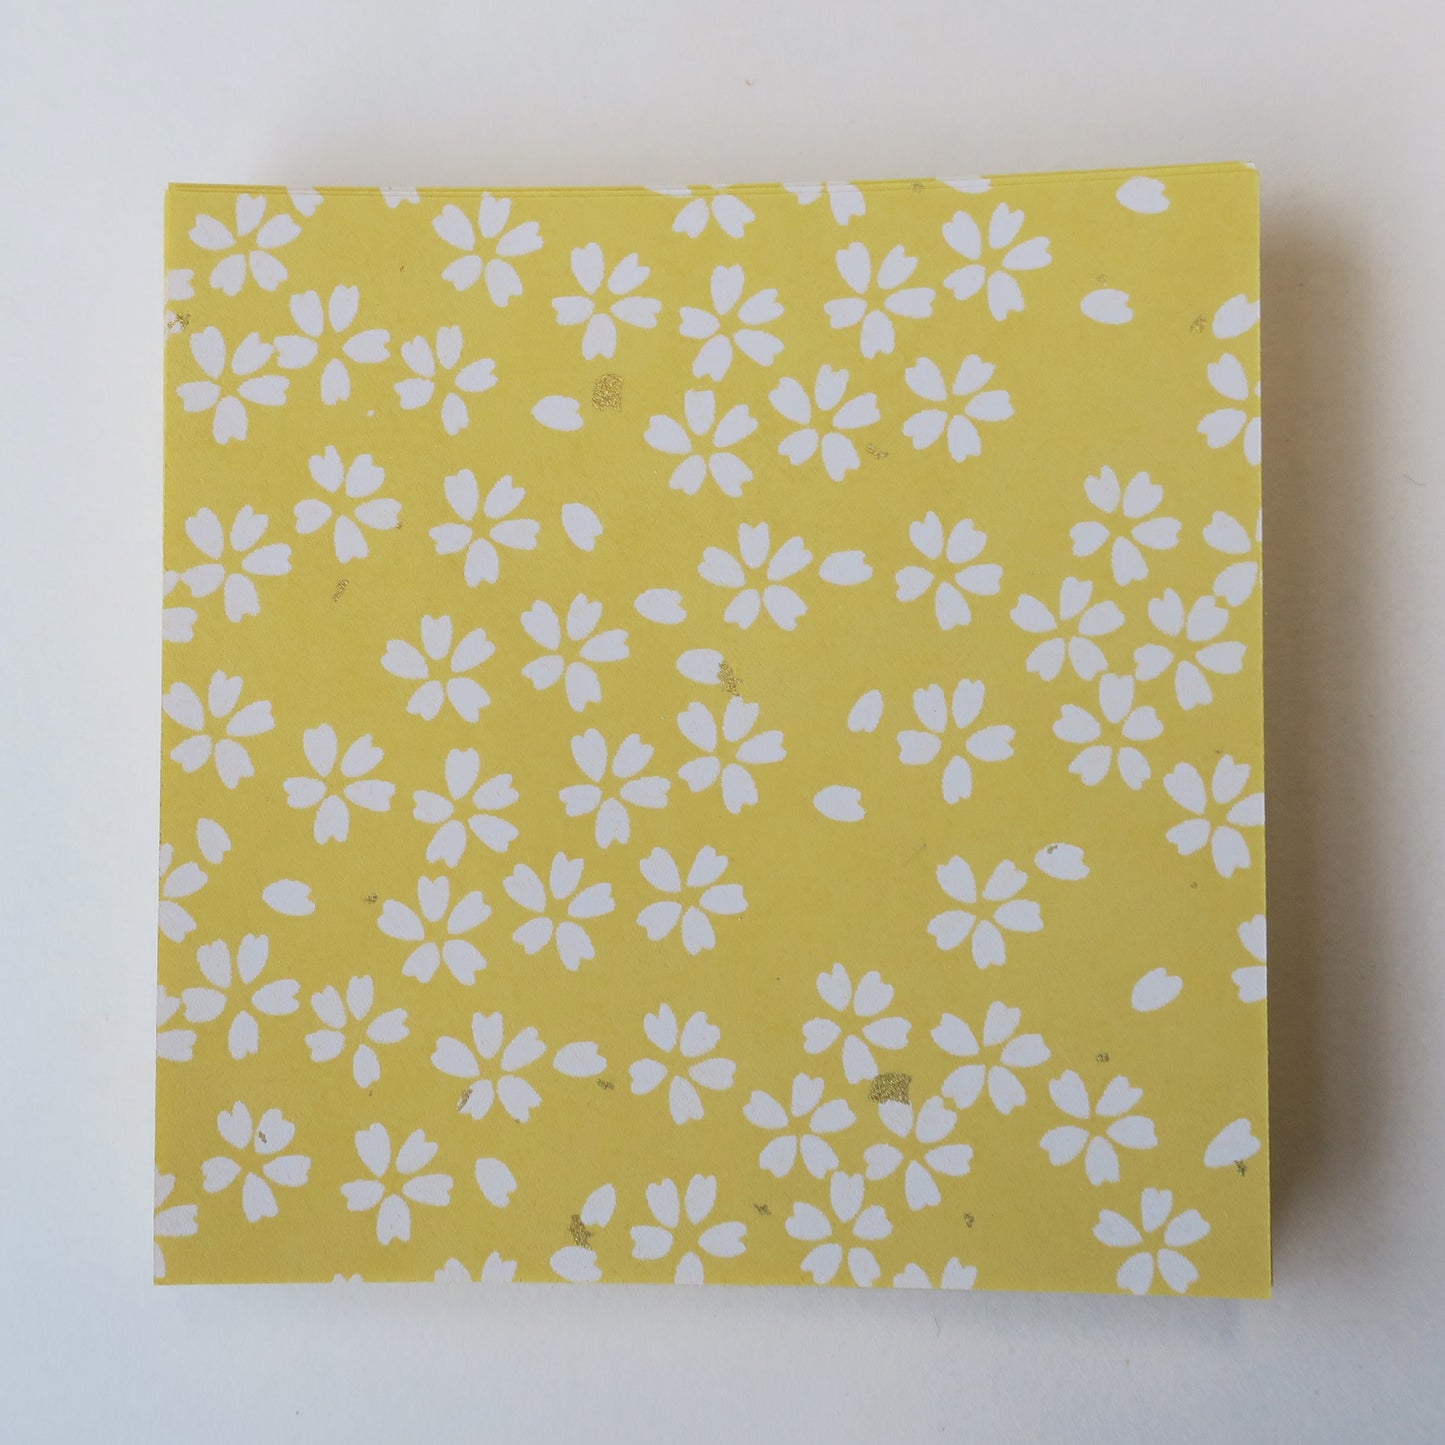 Pack of 100 Sheets 7x7cm Yuzen Washi Origami Paper HZ-187 - Small Cherry Blossom Yellow With Gold Freckles